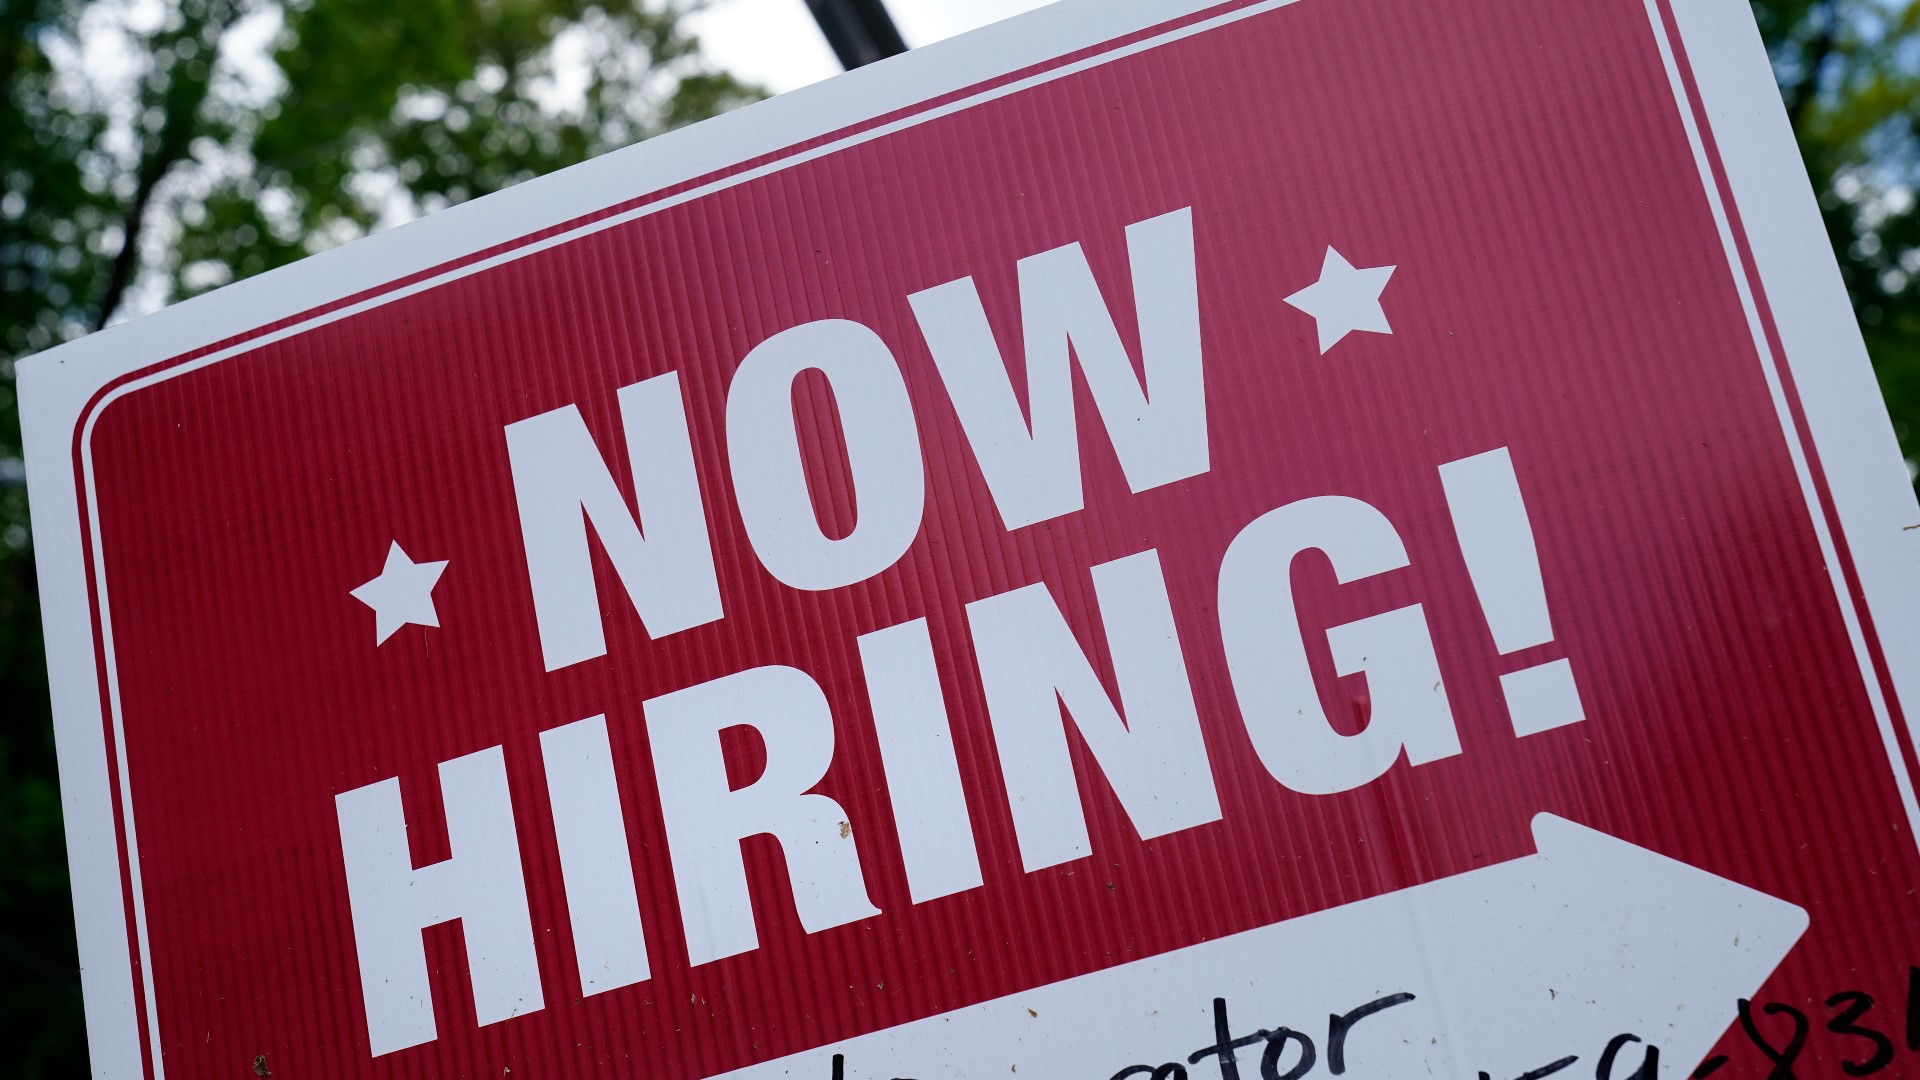 According to the U.S. Bureau of Labor Statistics, Arkansas was among the states with the largest decline in job openings in July, both in terms of numbers and rates.